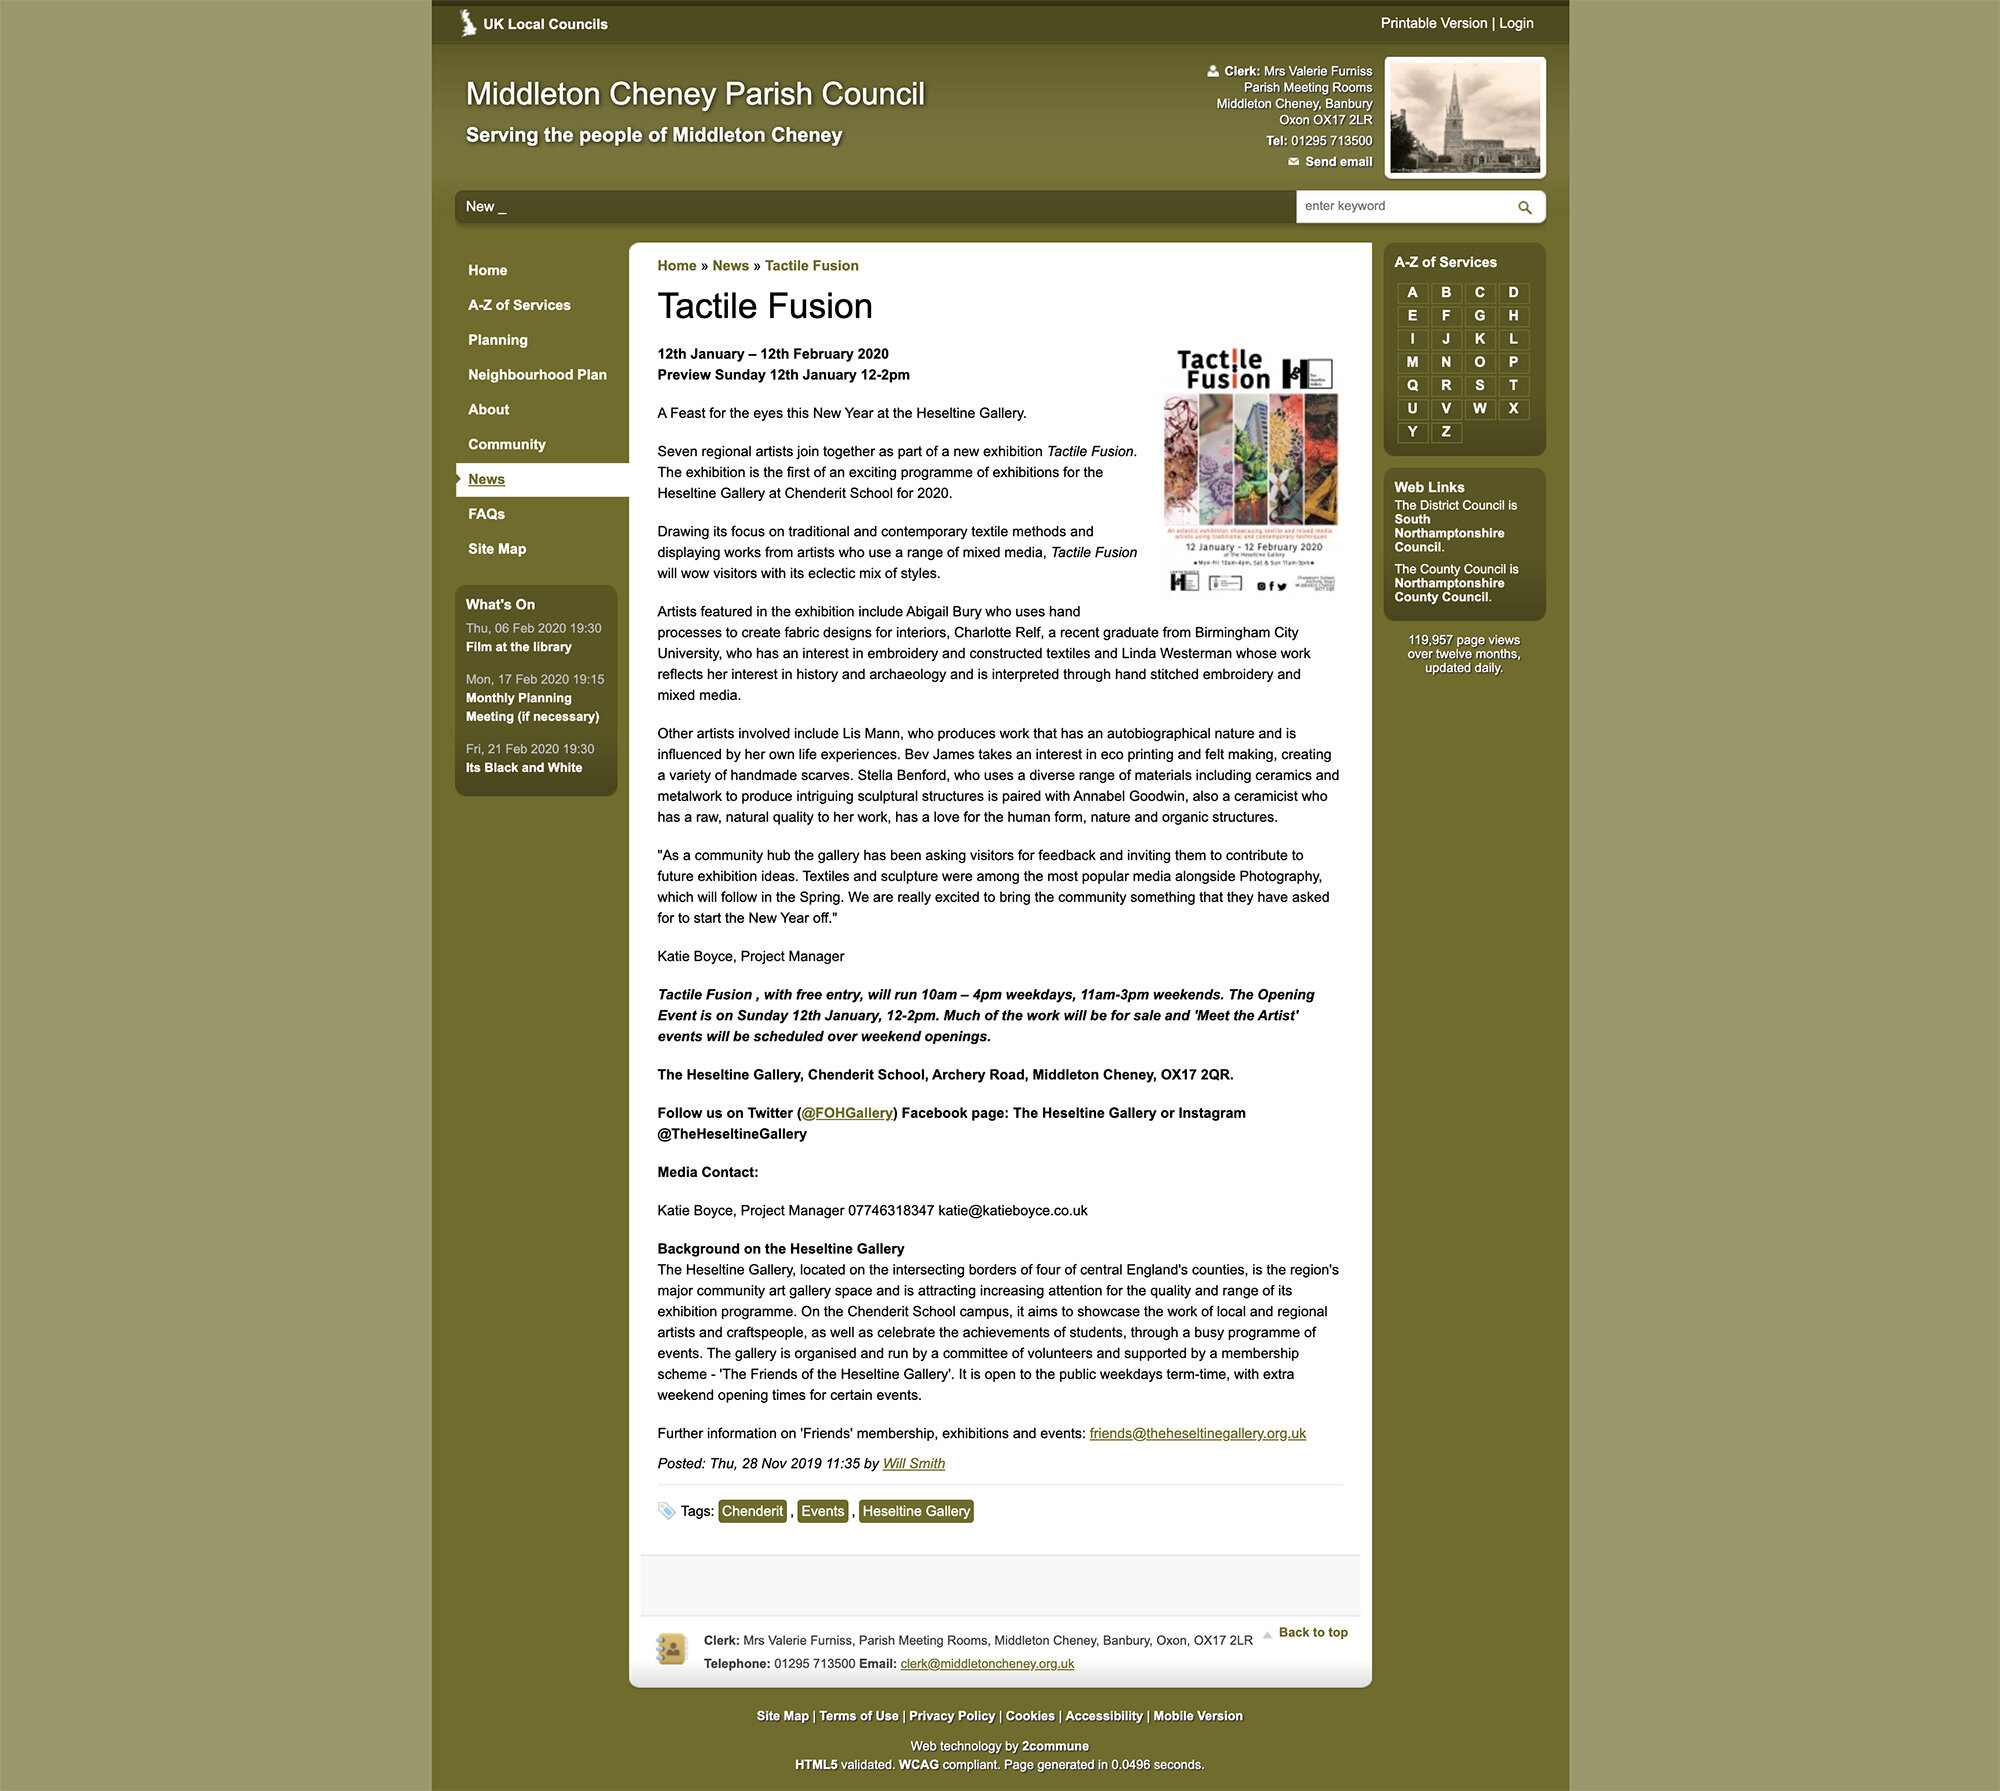 Tactile Fusion on the Middleton Cheney Parish Council website